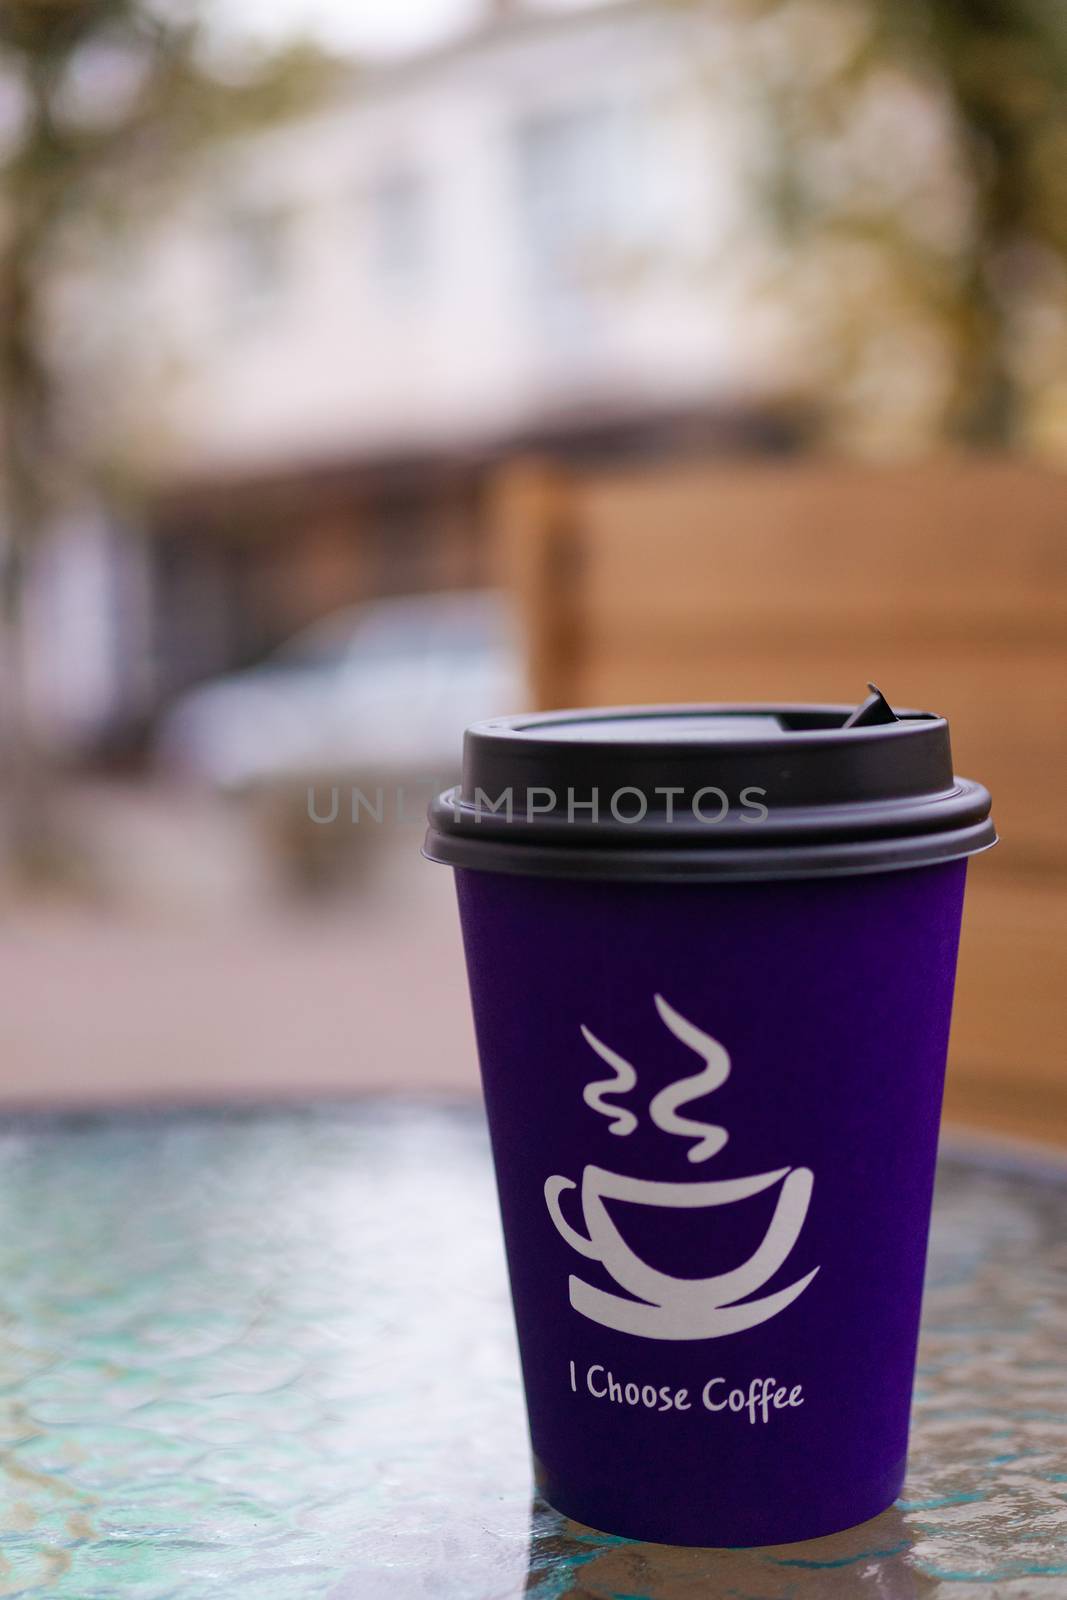 Purple coffee paper cup on glass clear table. On cup wrote: "I choose coffee". Beginning a good day! by alexsdriver